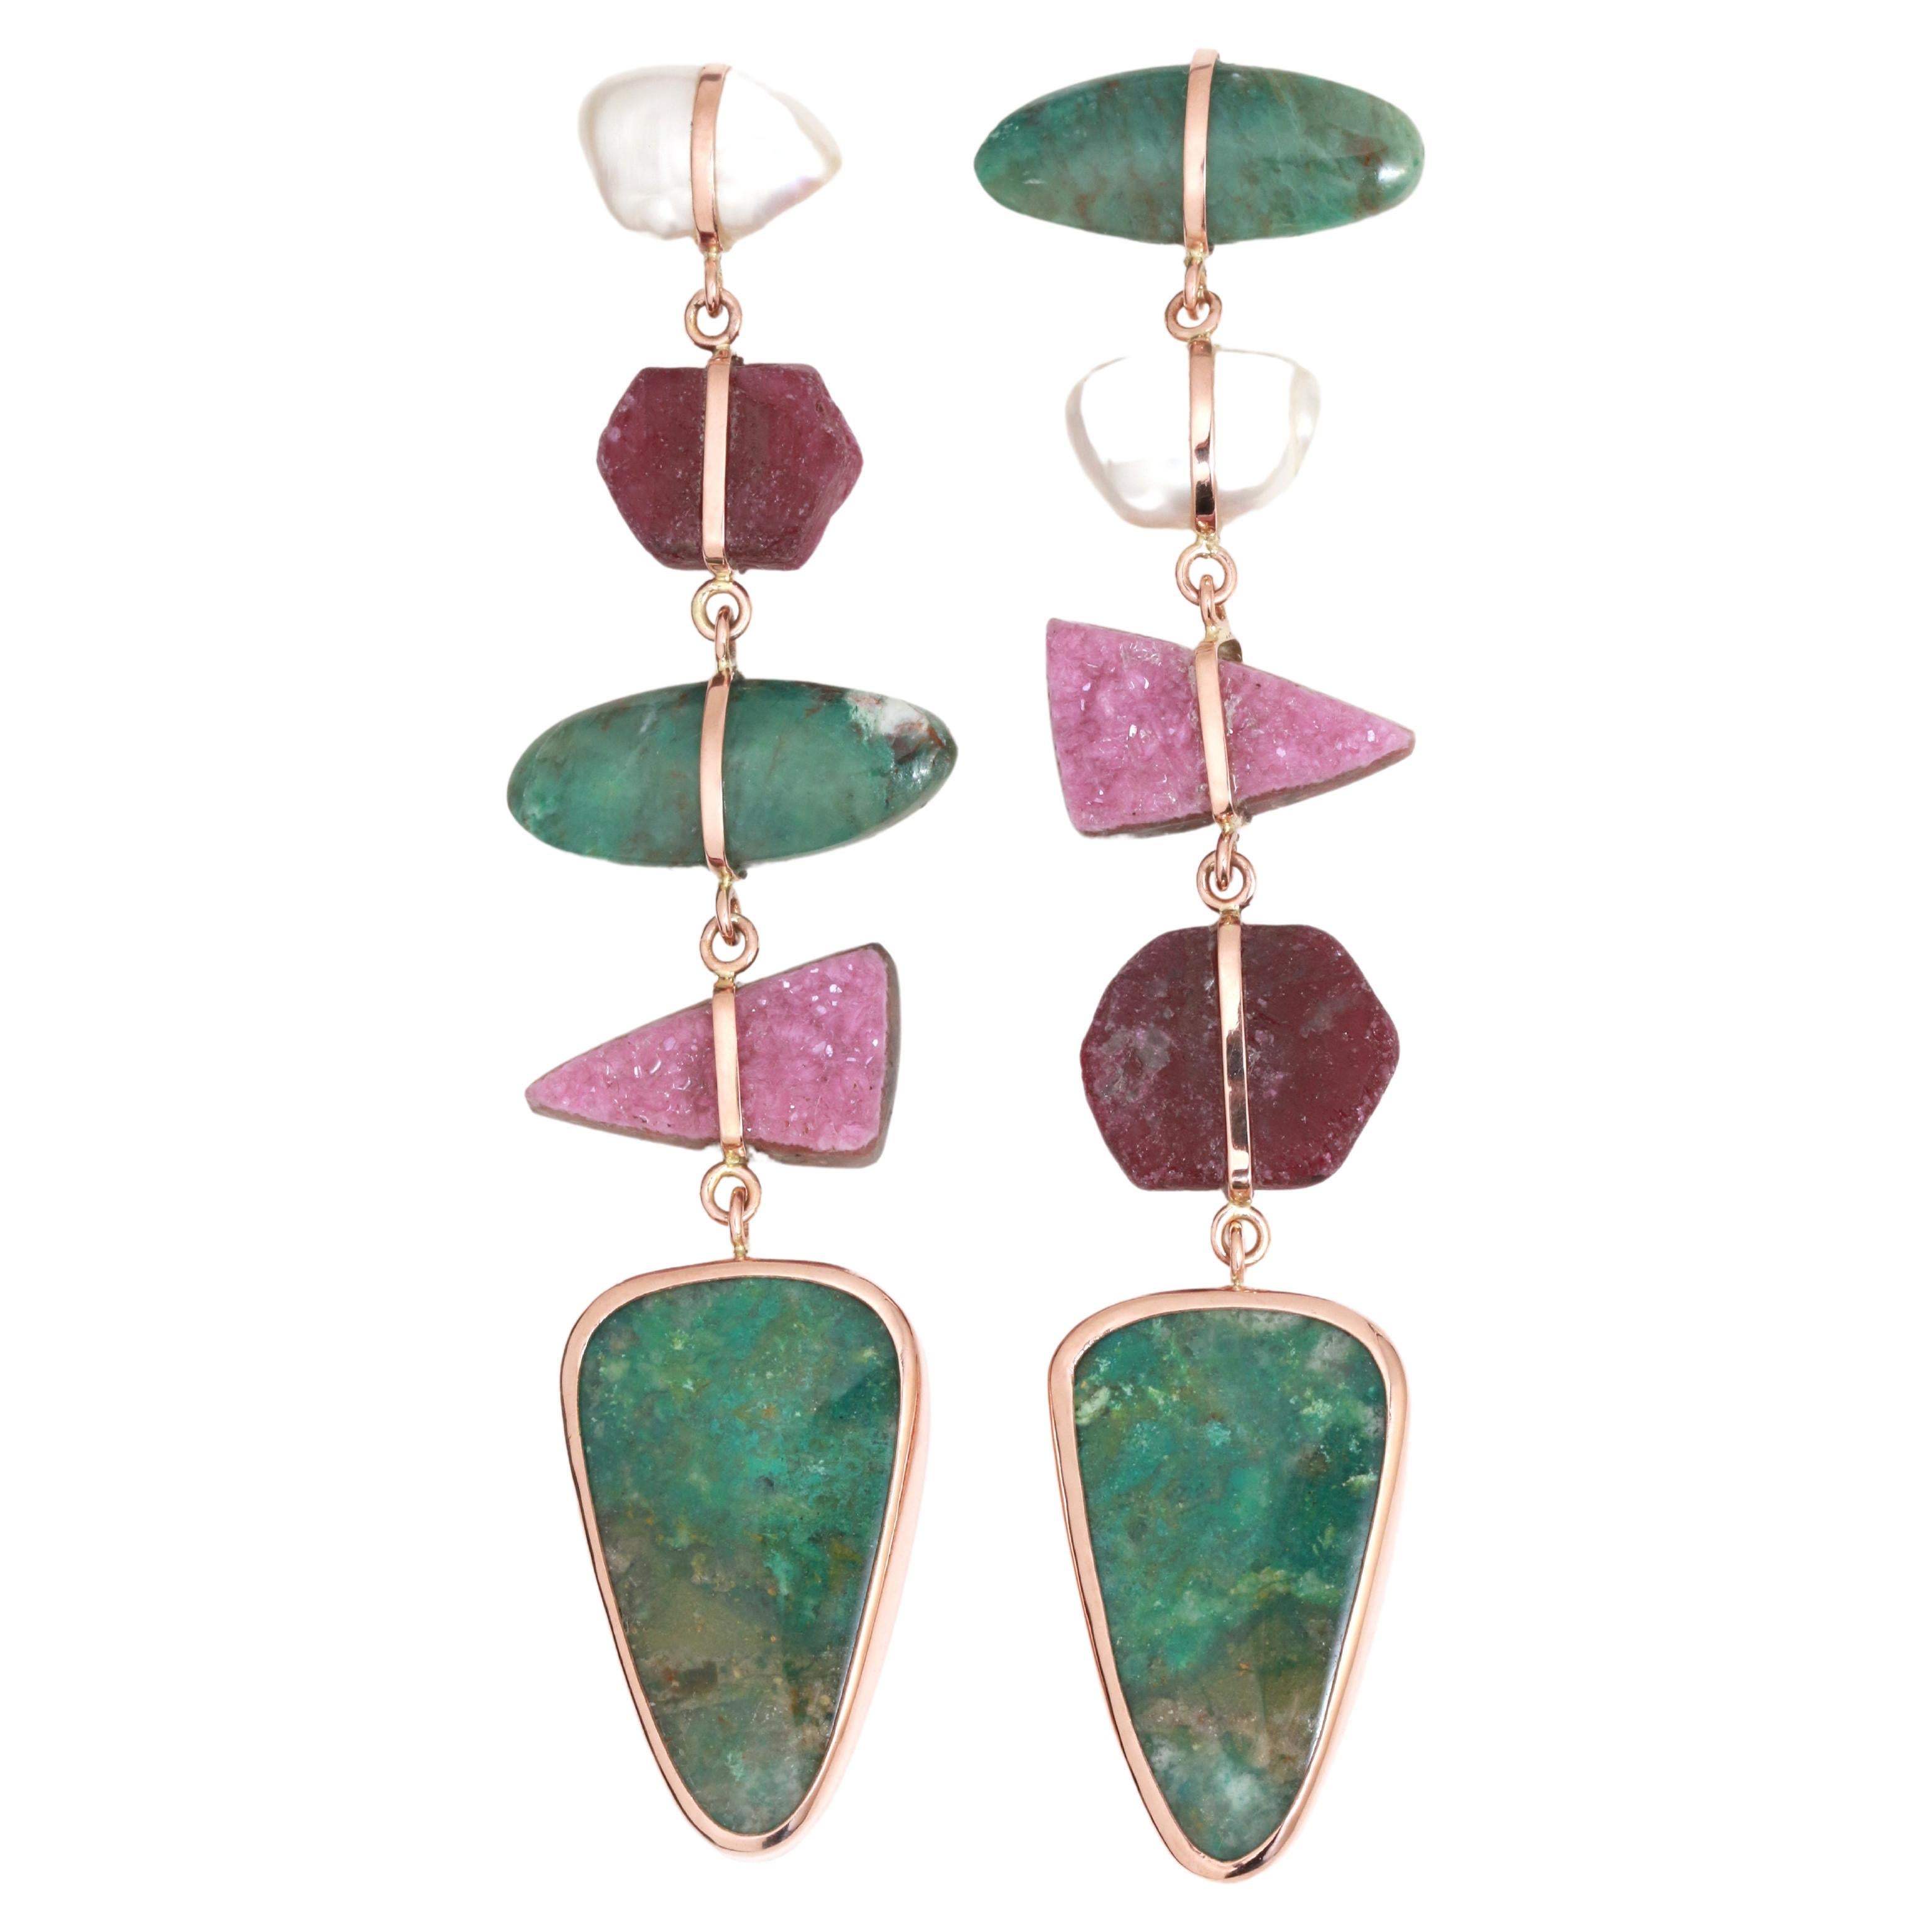 14k Rose Gold Five Drop Pearl, Ruby, Cobalto Calcite, and Chrysocolla Earrings